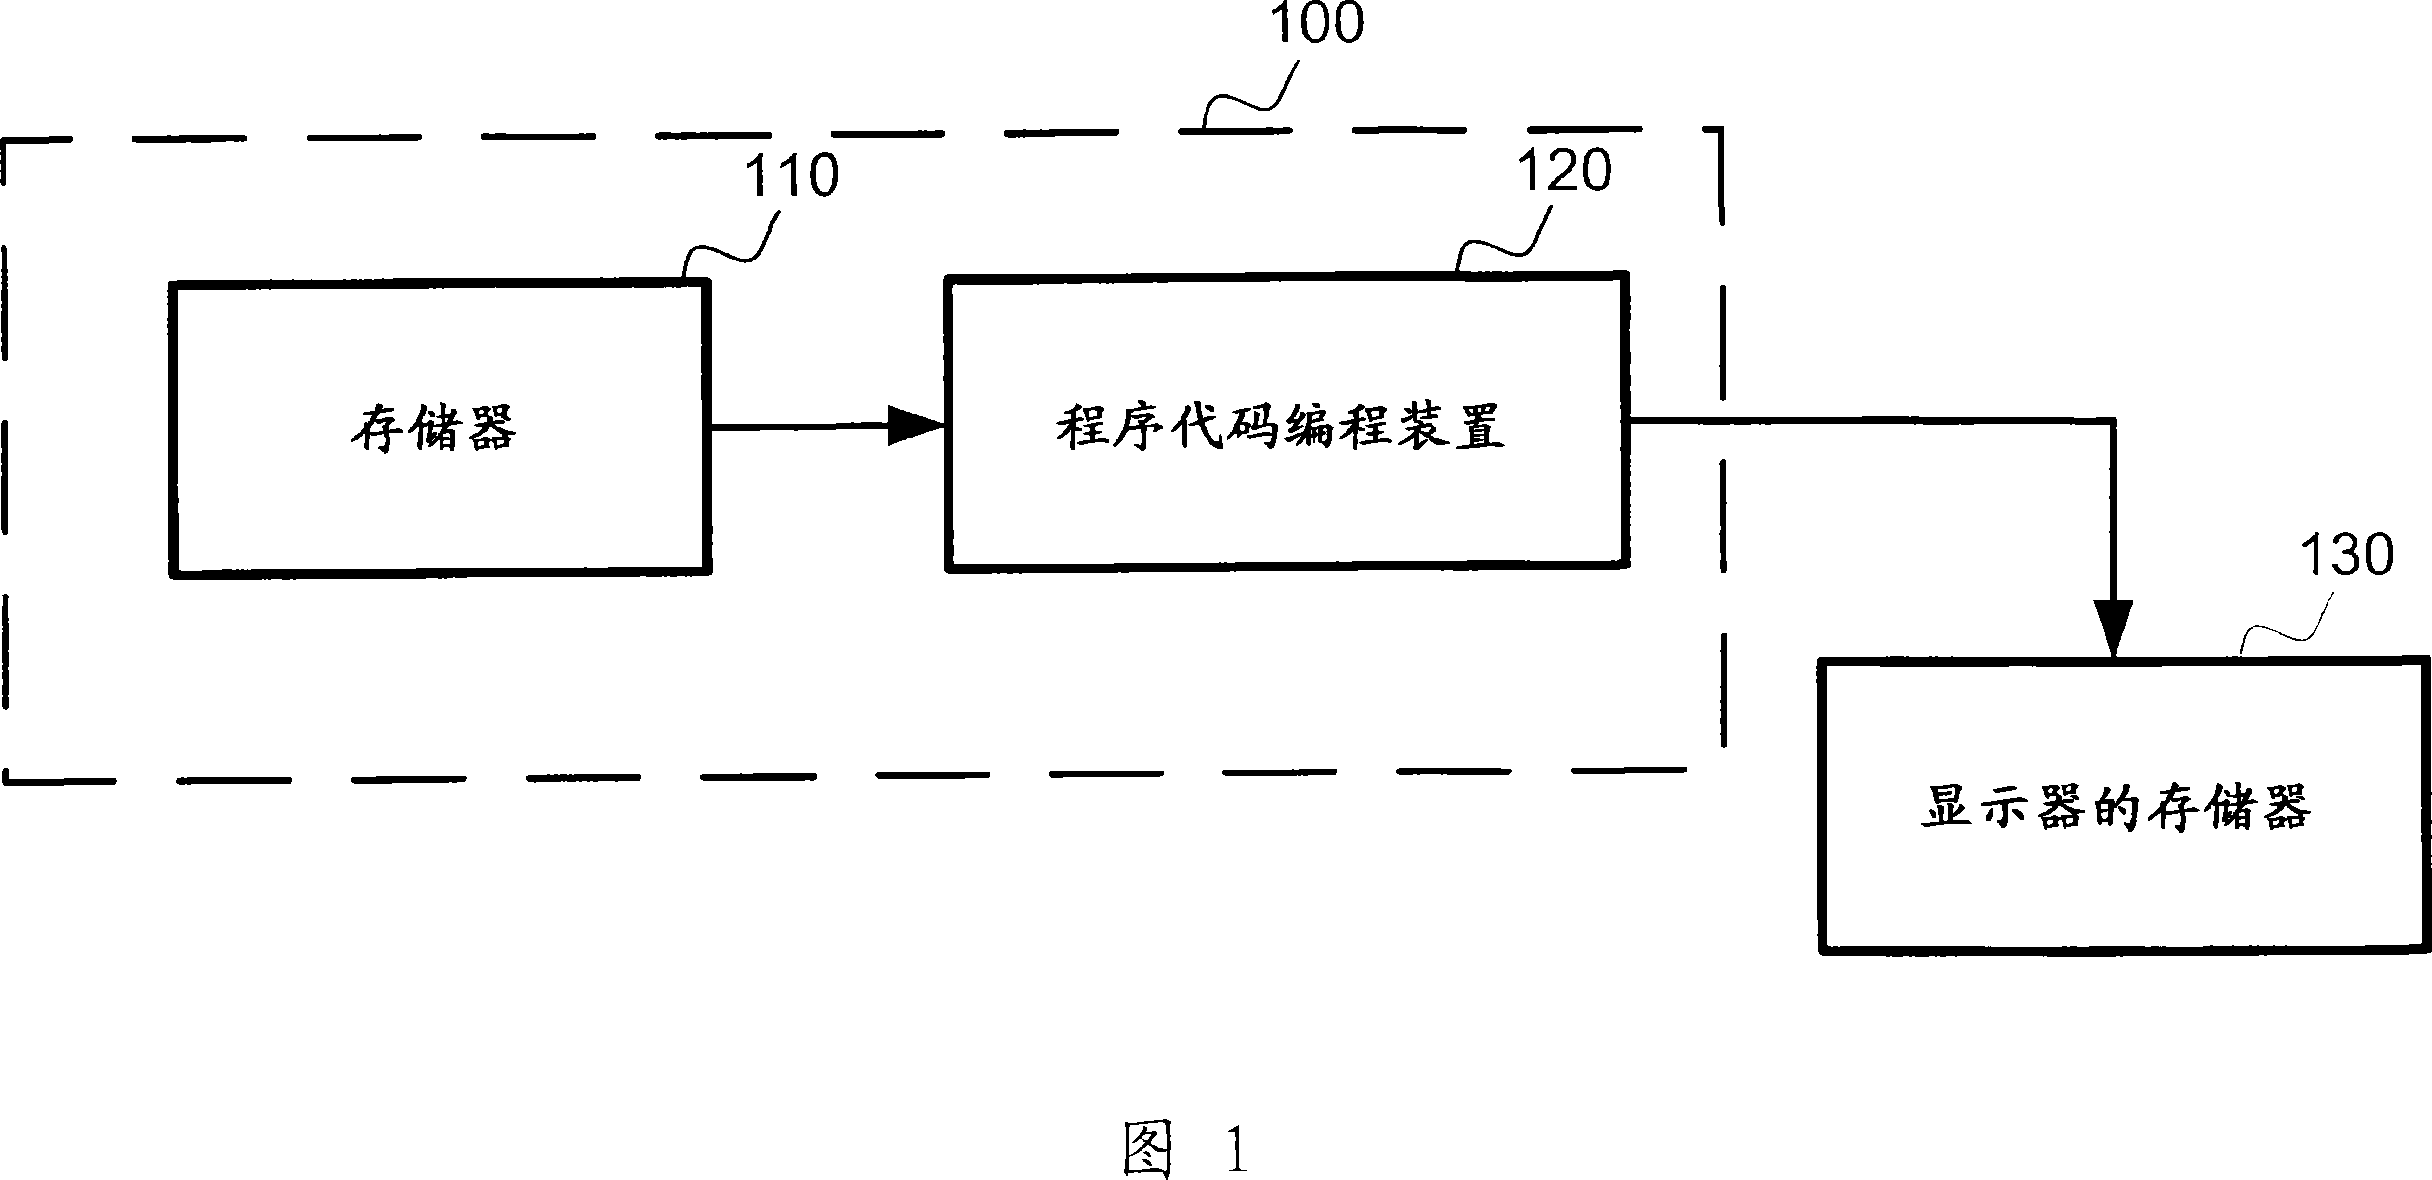 Apparatus and method for functional programming display